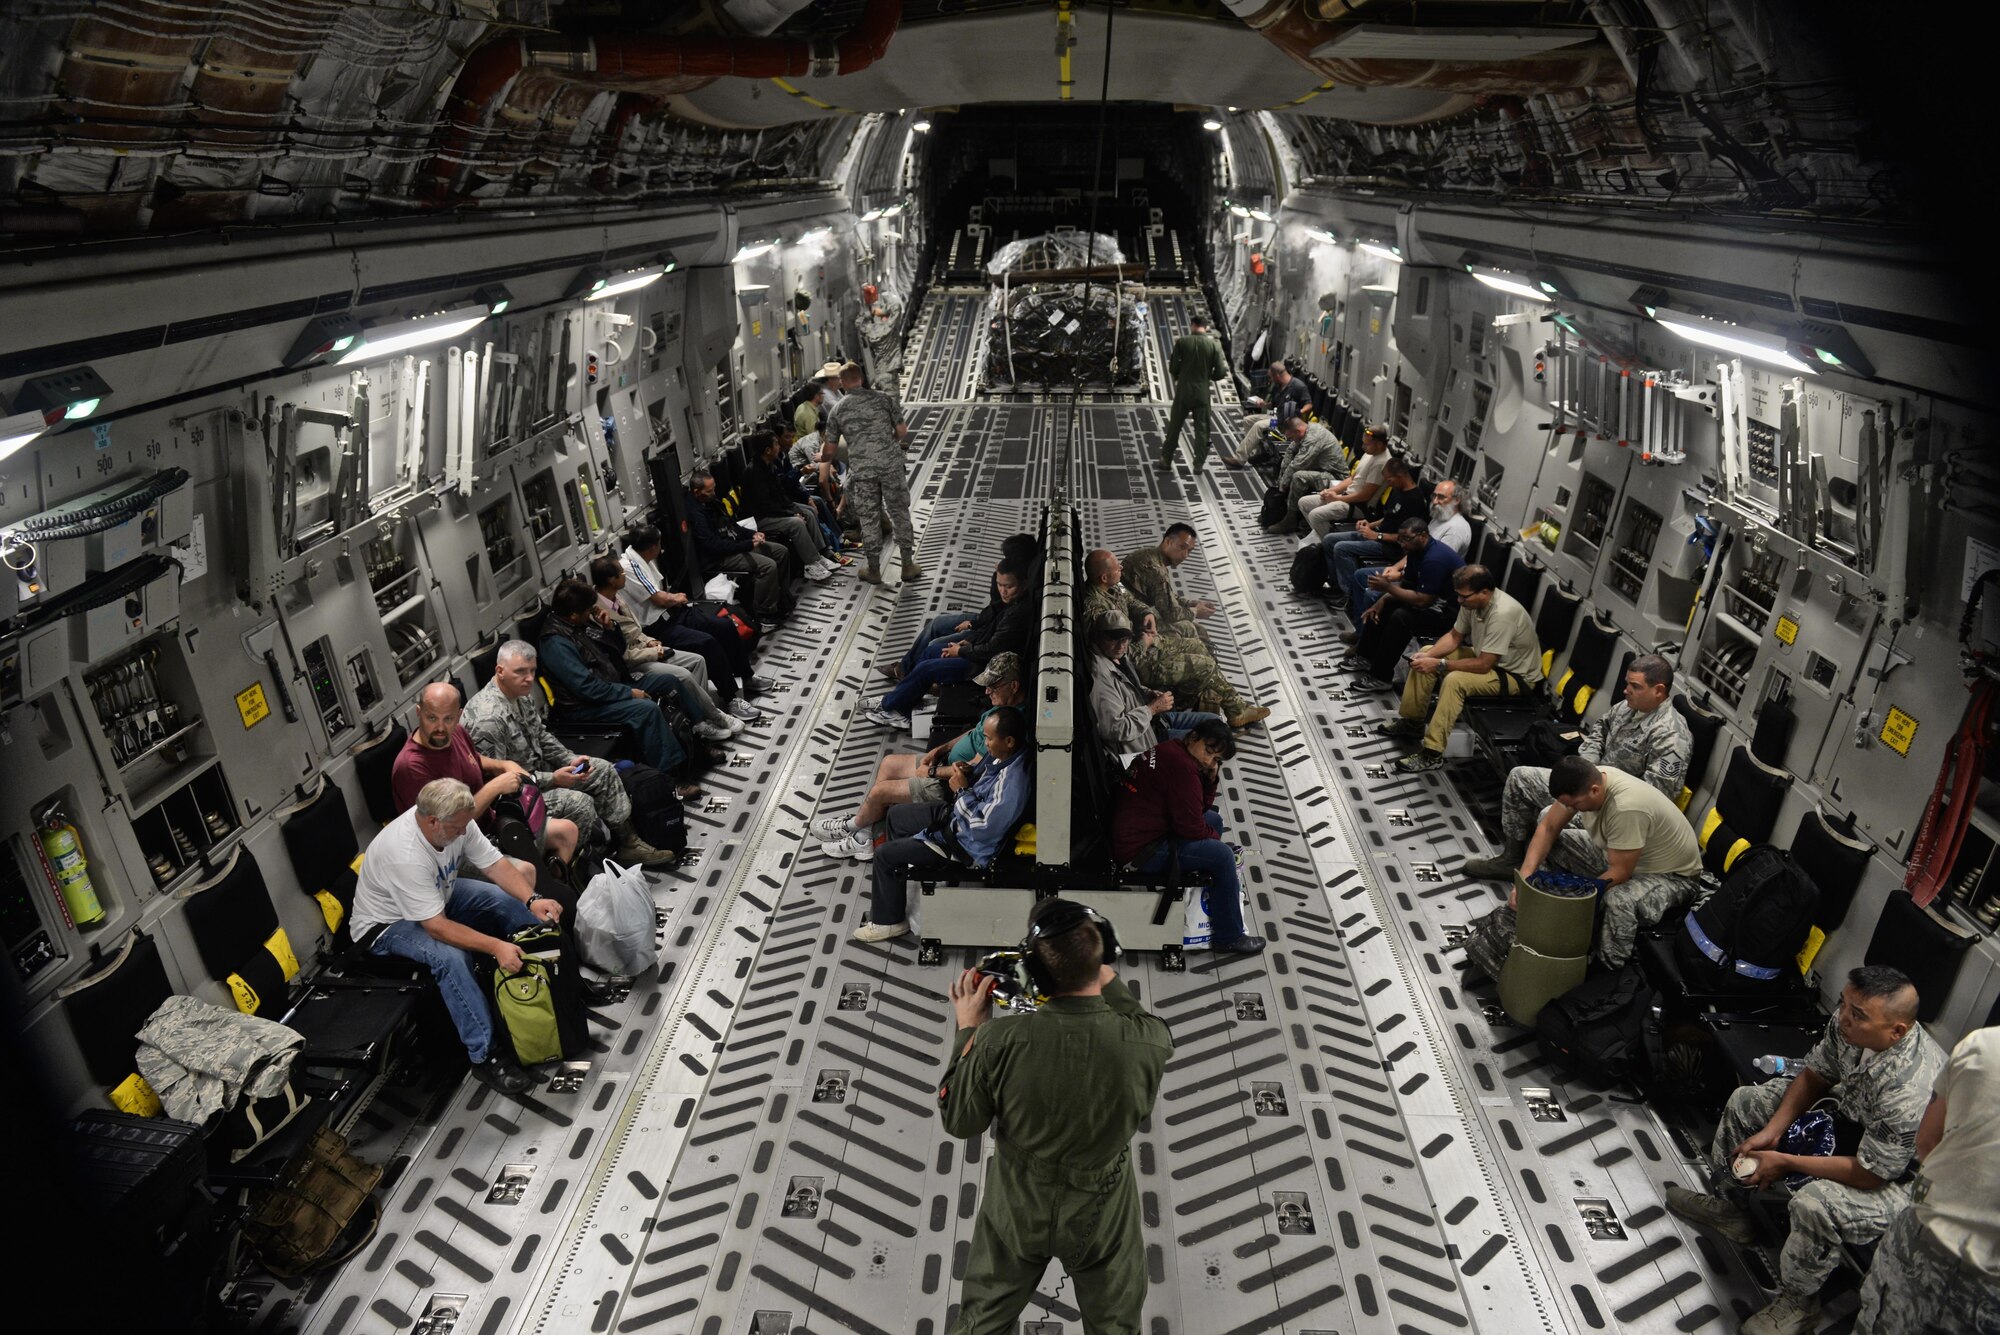 Wake Island Airfield staff and 36th Contingency Group Airmen prepare for departure in a C-17 Globemaster III, July 20, 2015, Andersen Air Force Base, Guam. A team with the 36th CRG deployed to Wake Island to assist in airfield storm recovery efforts after the atoll was evacuated a few days a earlier in preparation of Typhoon Halole. (U.S. Air Force photo by Senior Airman Alexander W. Riedel/Released)